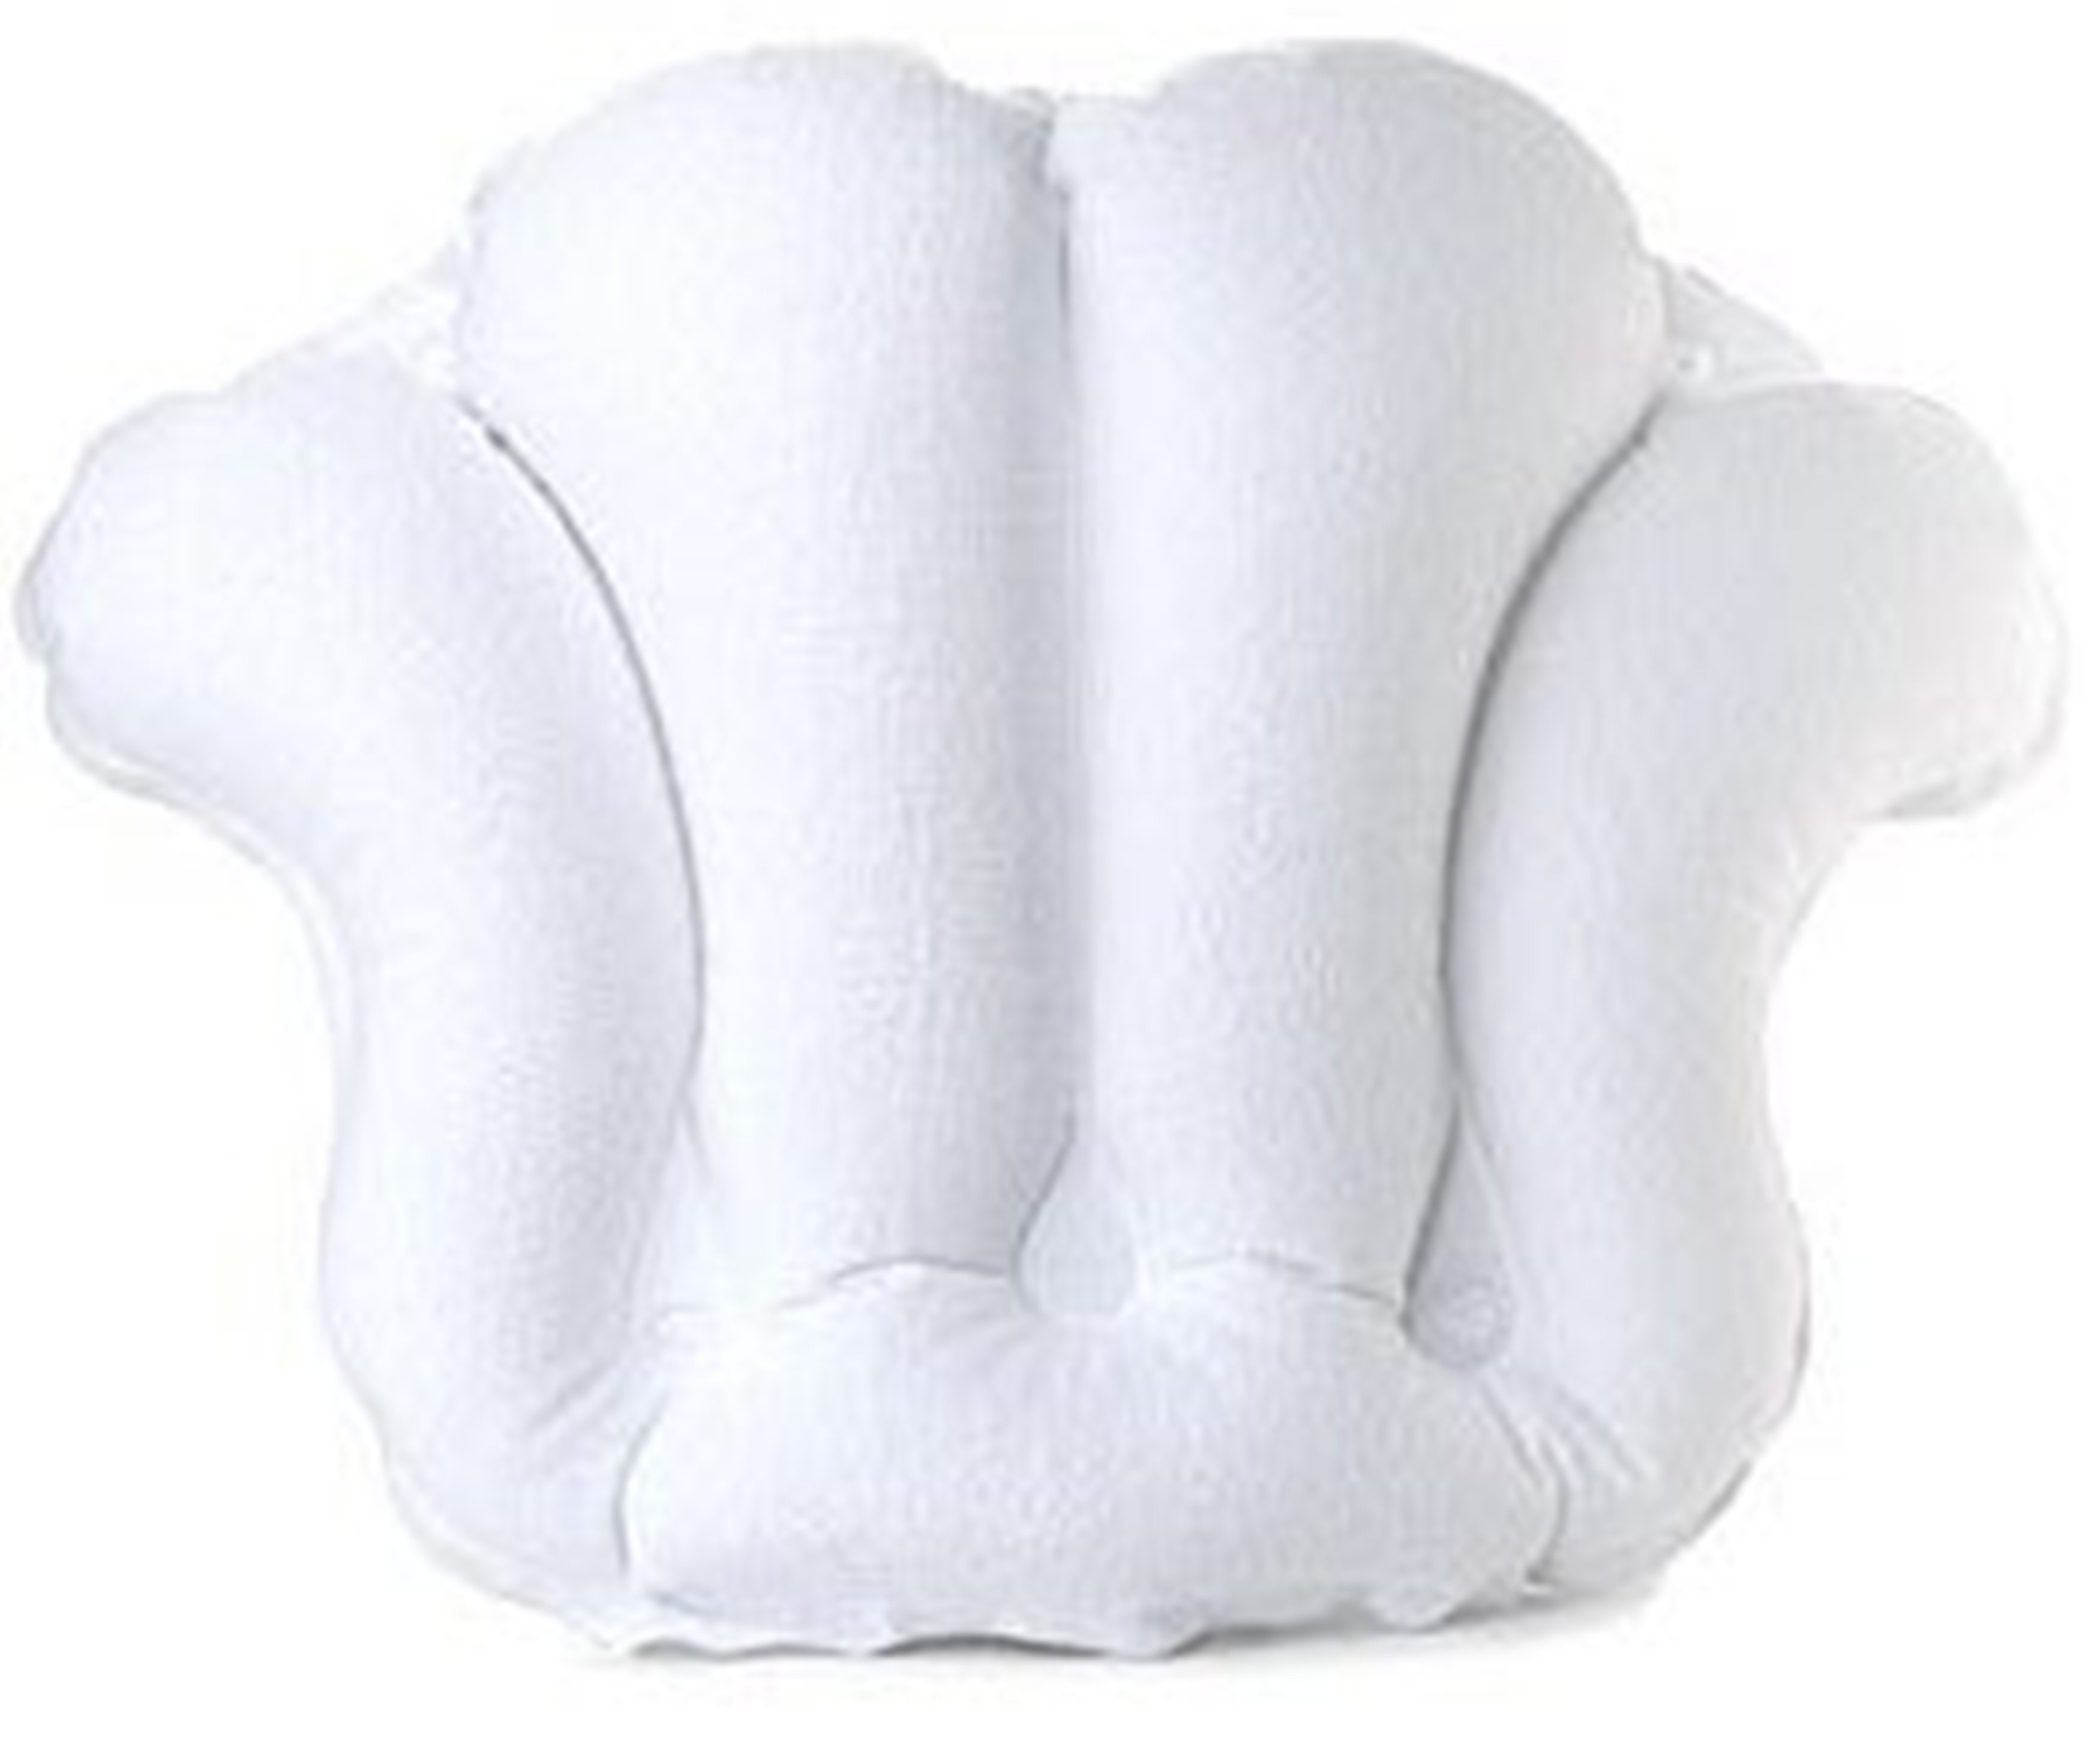 DeluxeComfort Deluxe Comfort Terry Bath Pillow - Spa Quality Terry Cloth - Bath Pillow, White